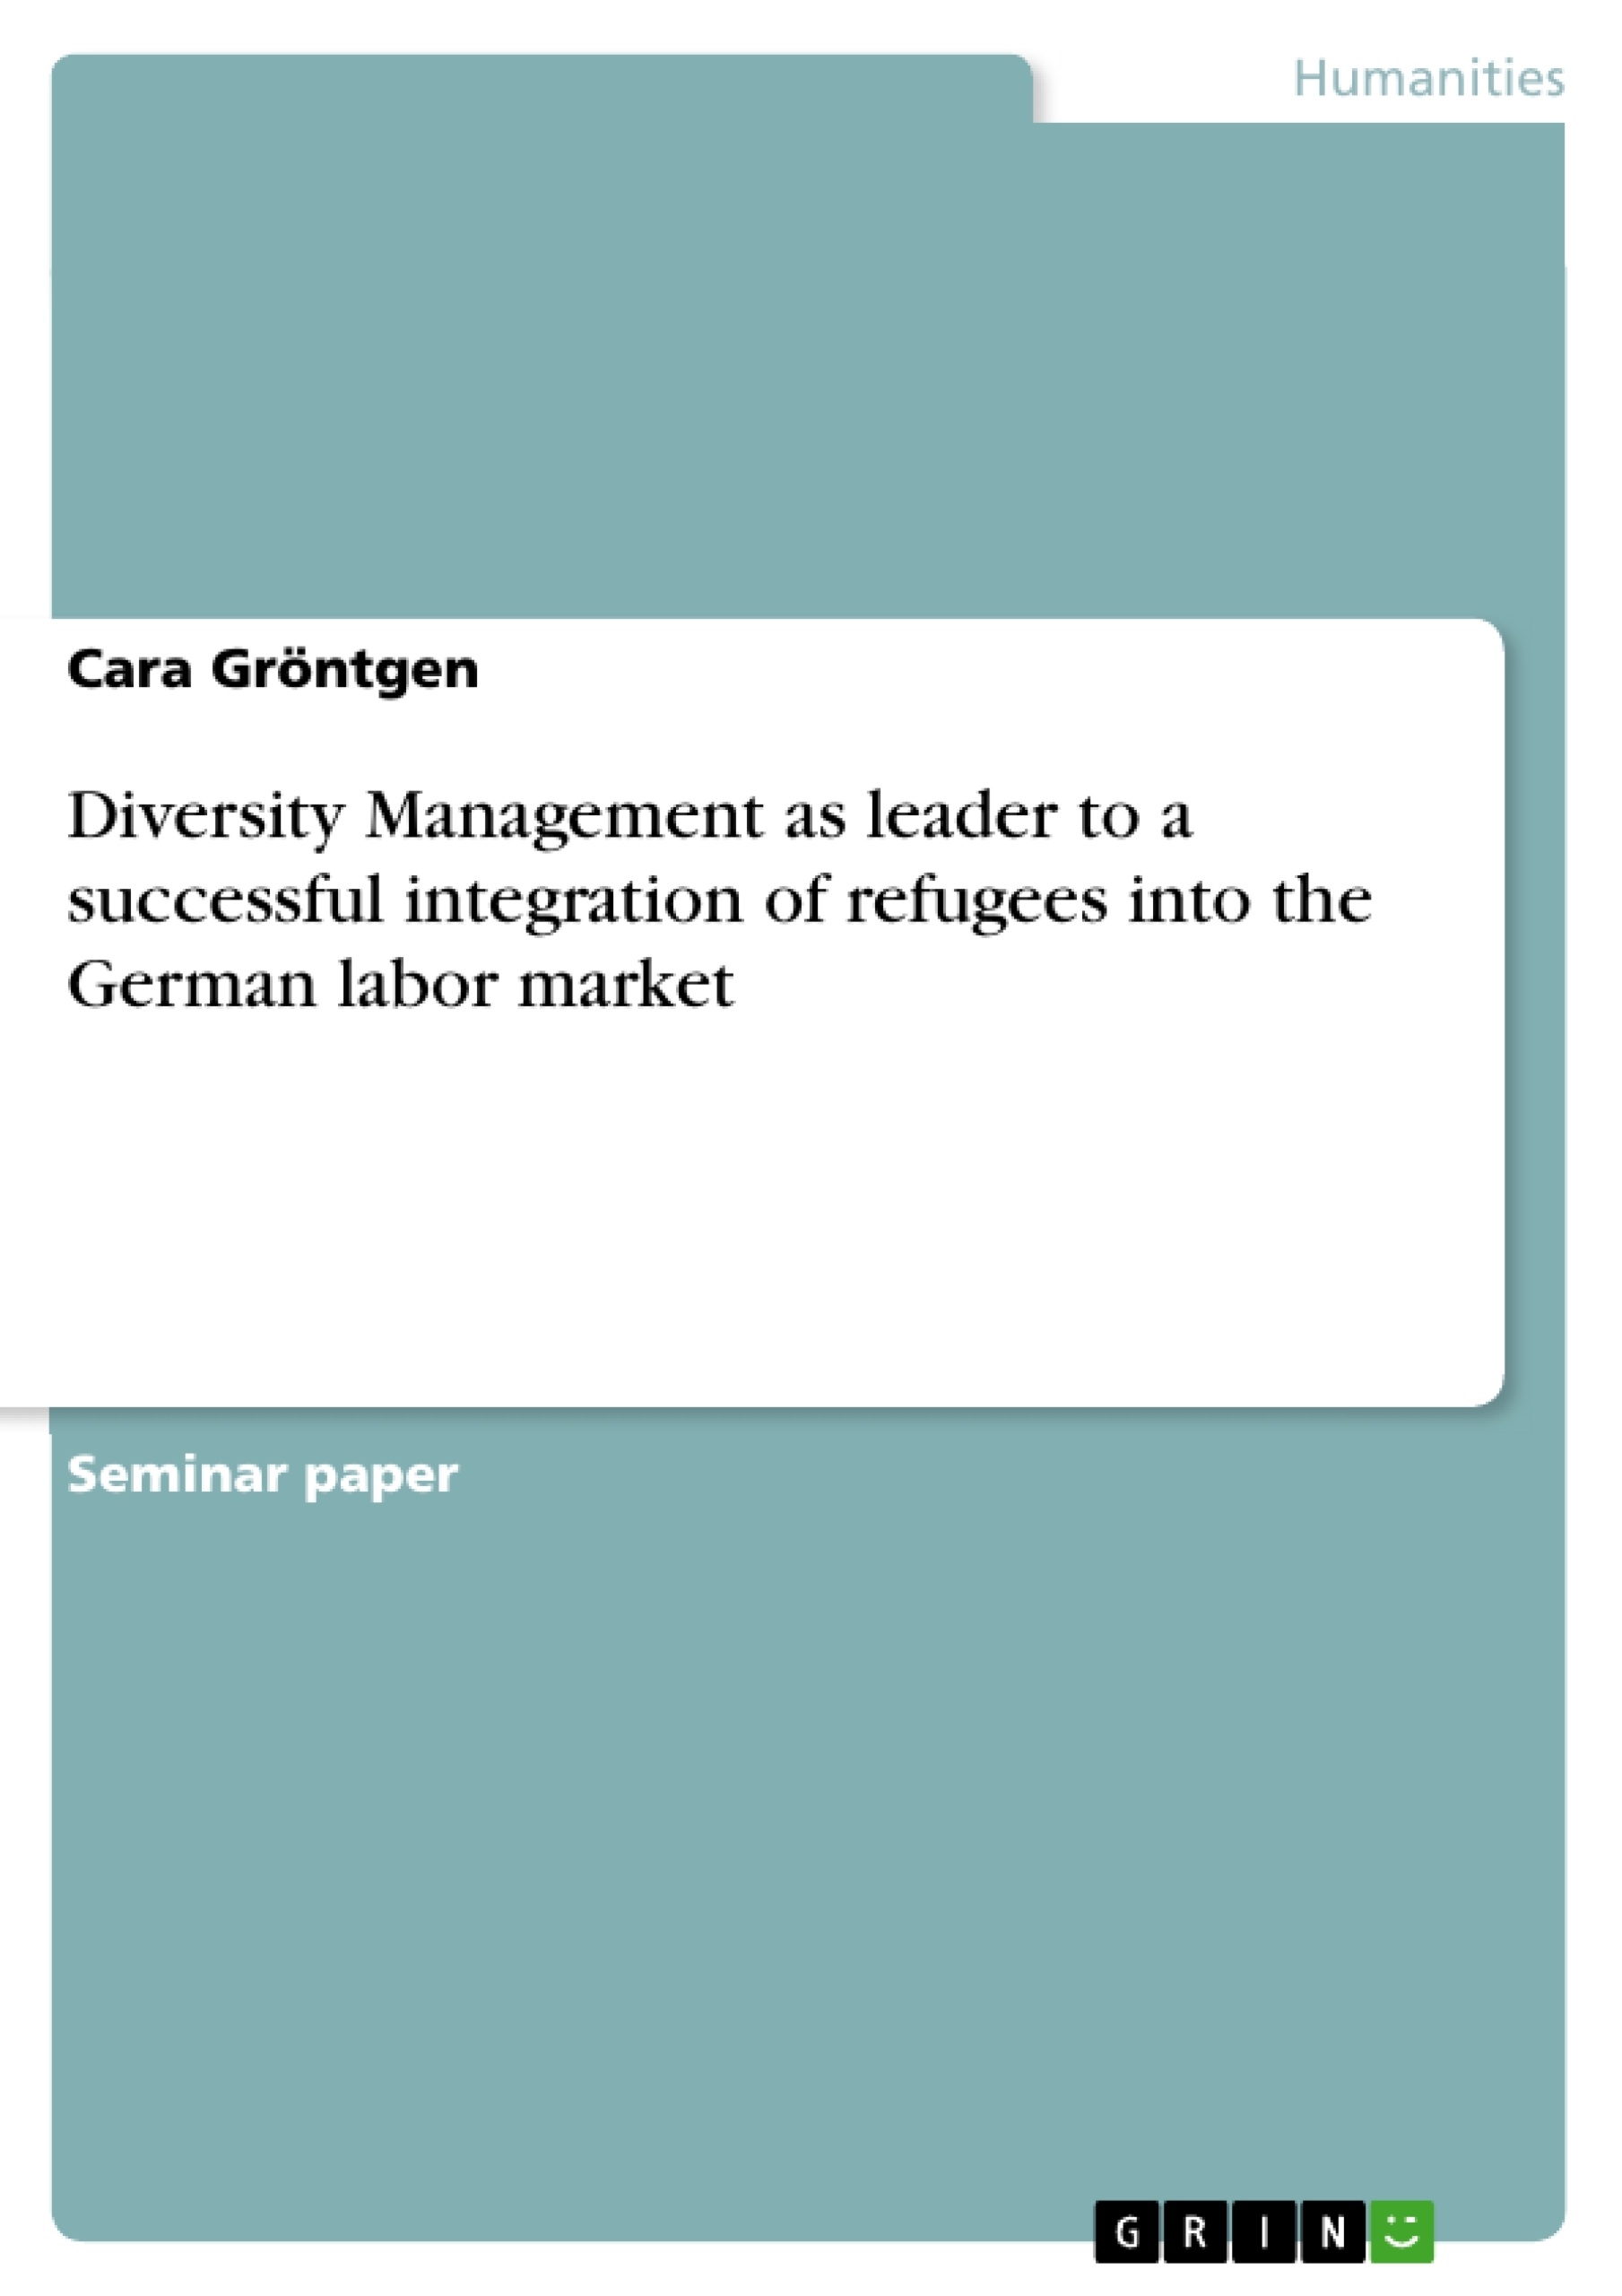 Title: Diversity Management as leader to a successful integration of refugees into the German labor market